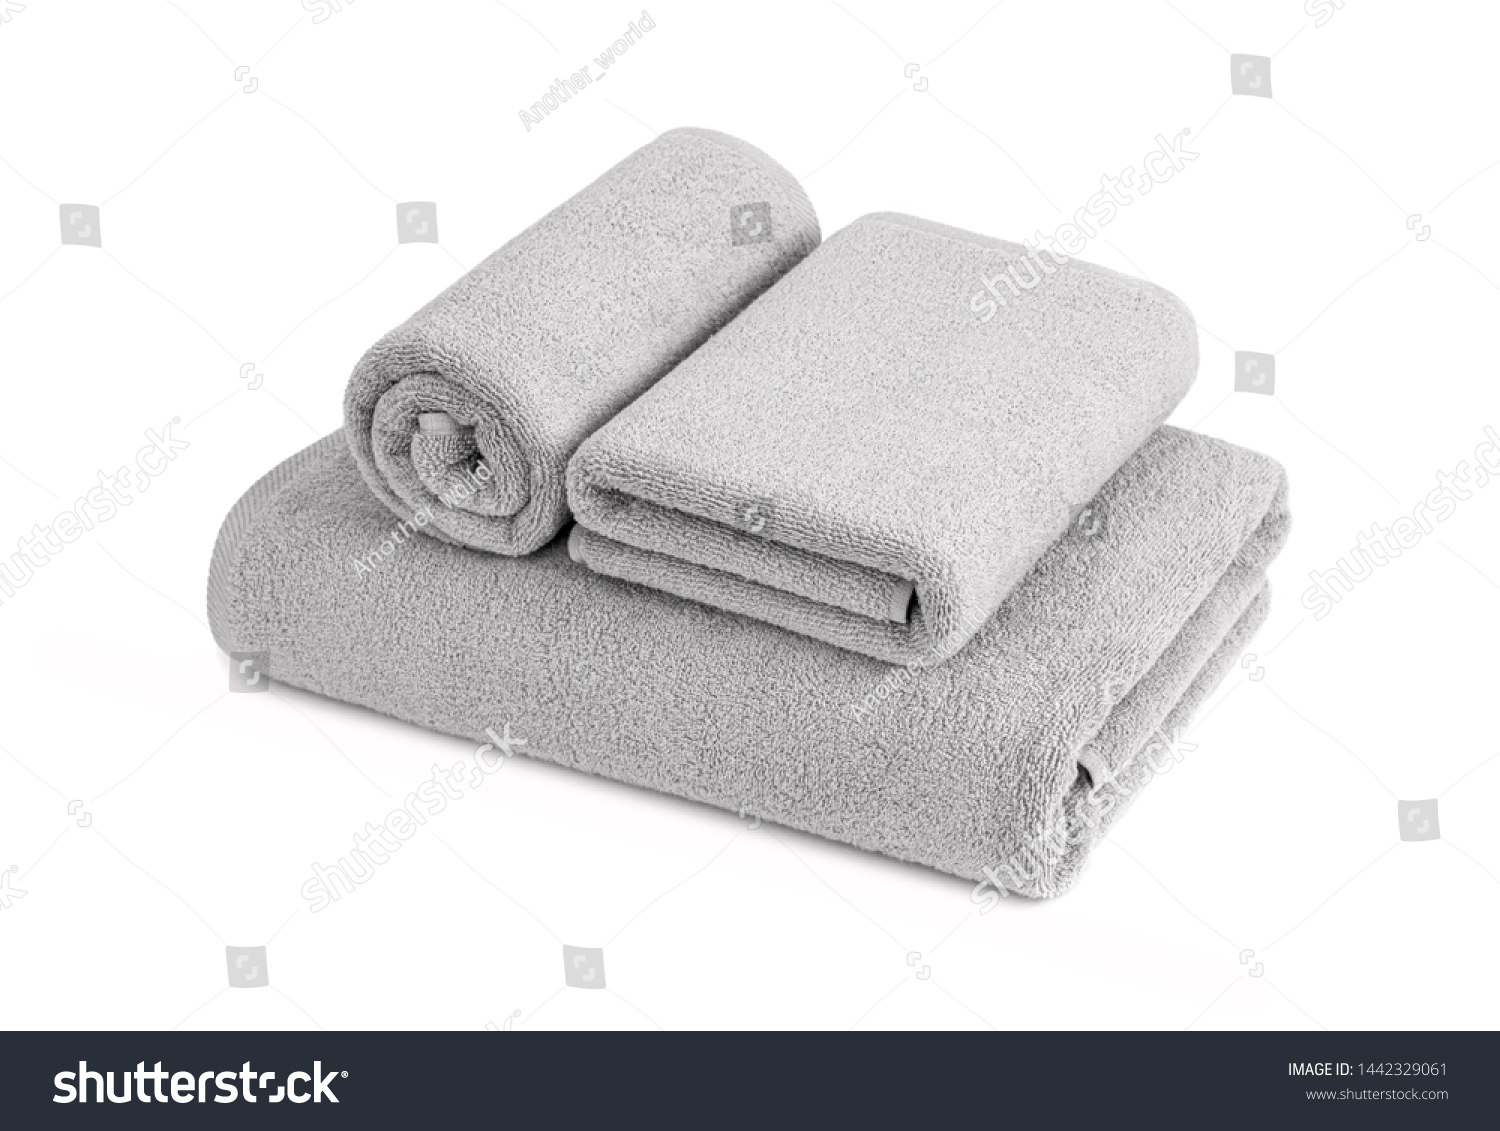 Gray terry towels rolled, folded and stacked isolated.Terry towels against white backdrop. Folded and rolled soft bath towels. Stack of grey cotton towels on a white background #1442329061